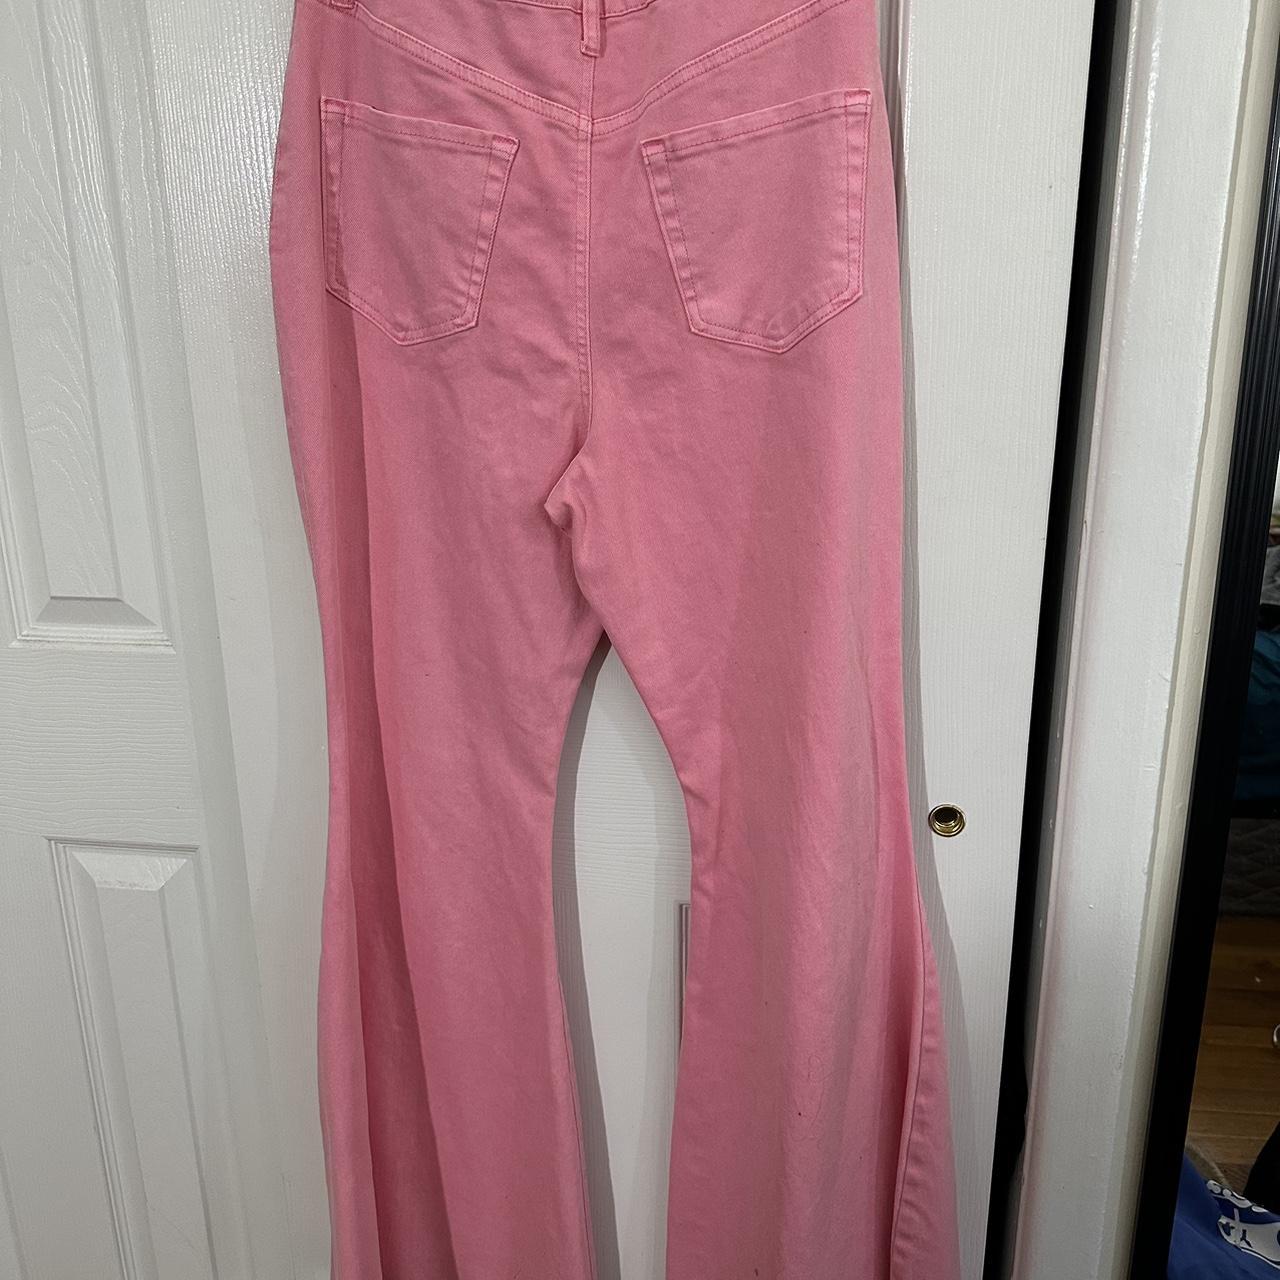 Wild fable pink flare jeans Never worn! Size 10,... - Depop